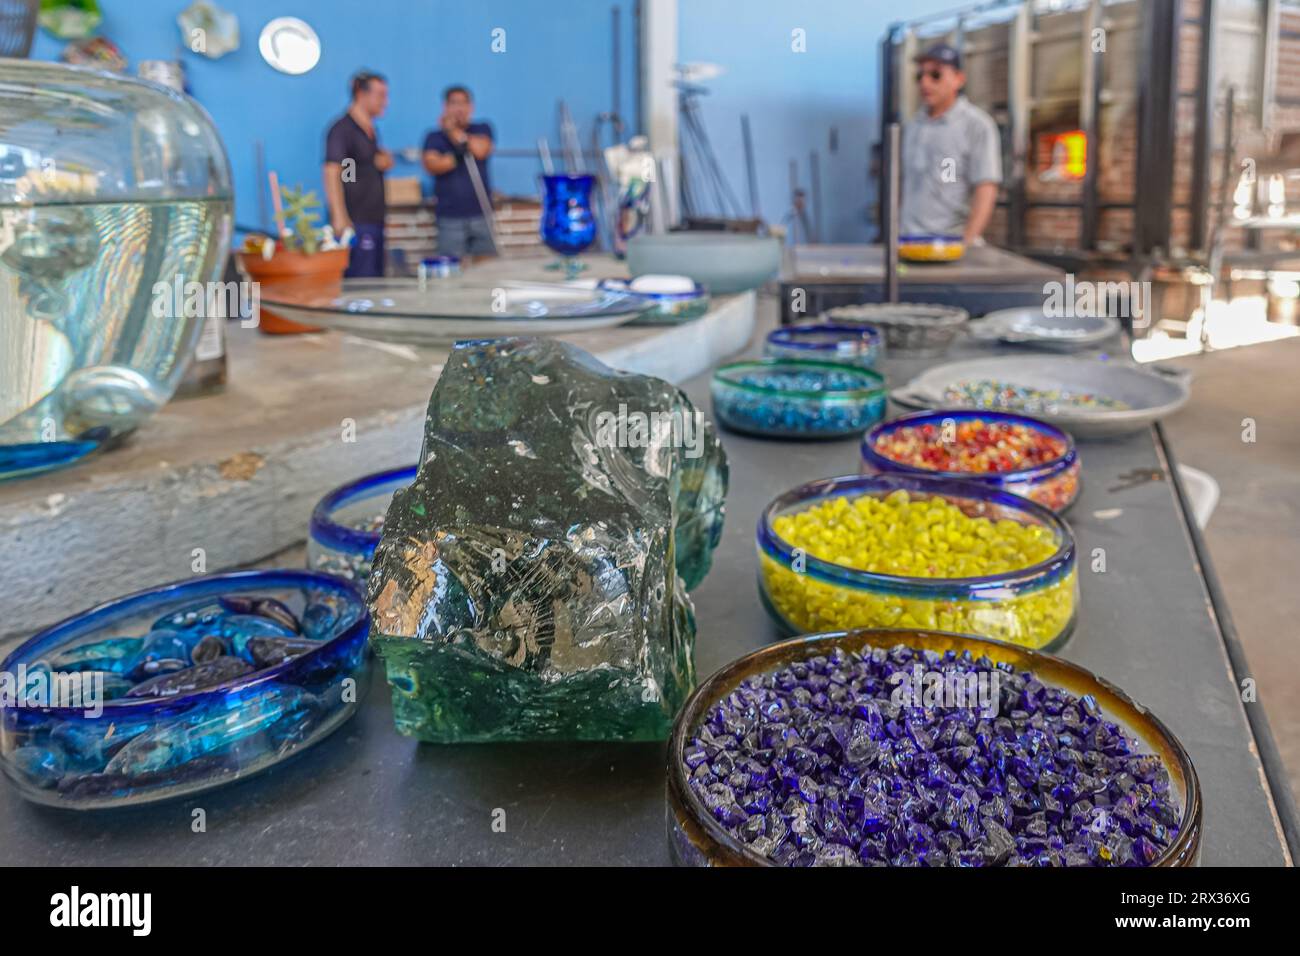 Mexico, Cabo San Lucas - July 16, 2023: La Fabrica de Vidrio Soplado. Hand blown artistic glass factory. Dishes filled with different color pellets cl Stock Photo